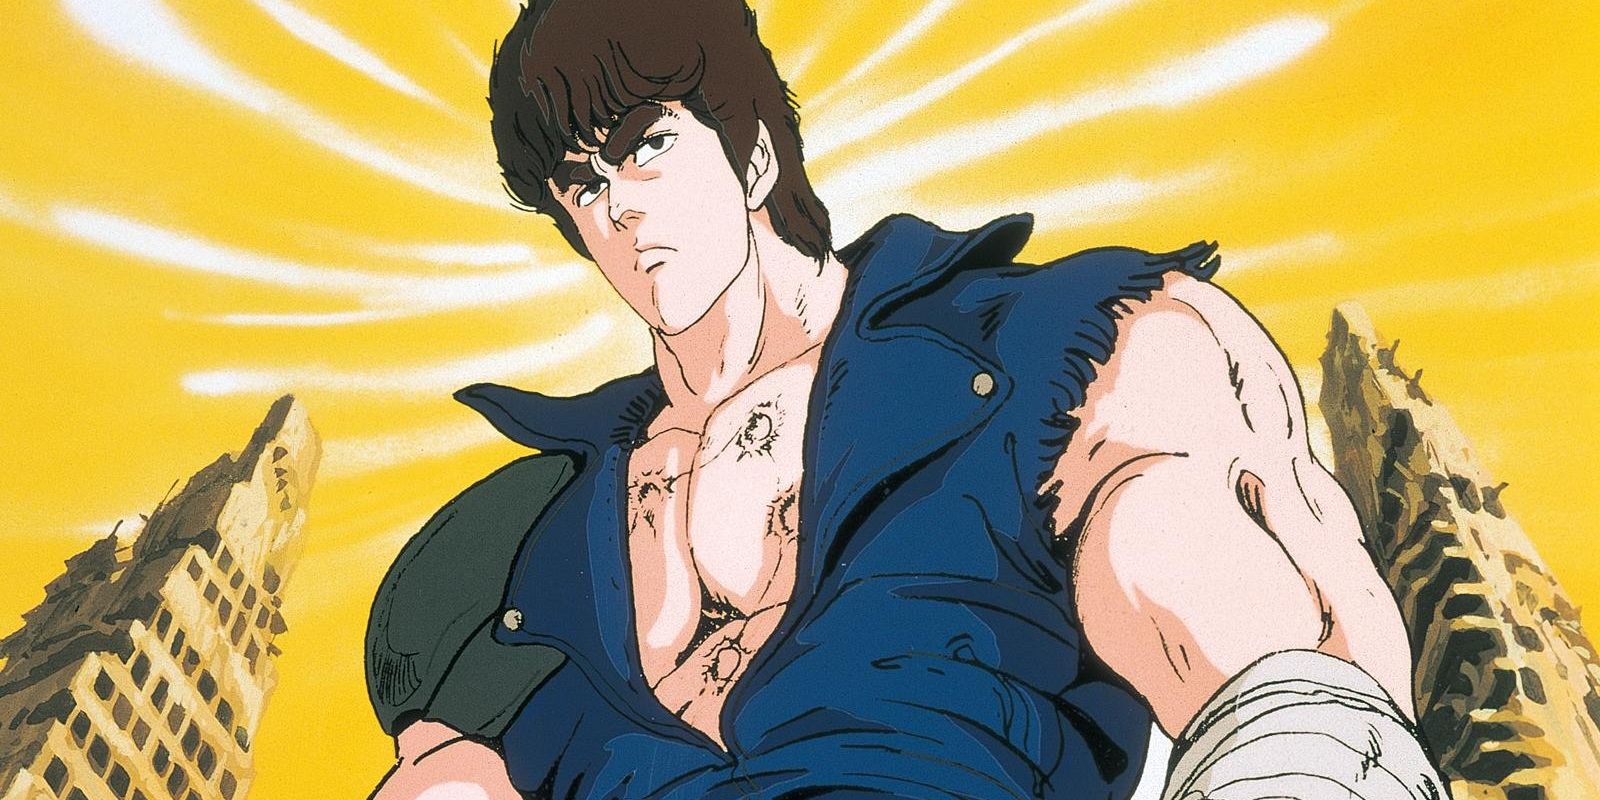 Fist of the North Star Spinoff Manga Announced